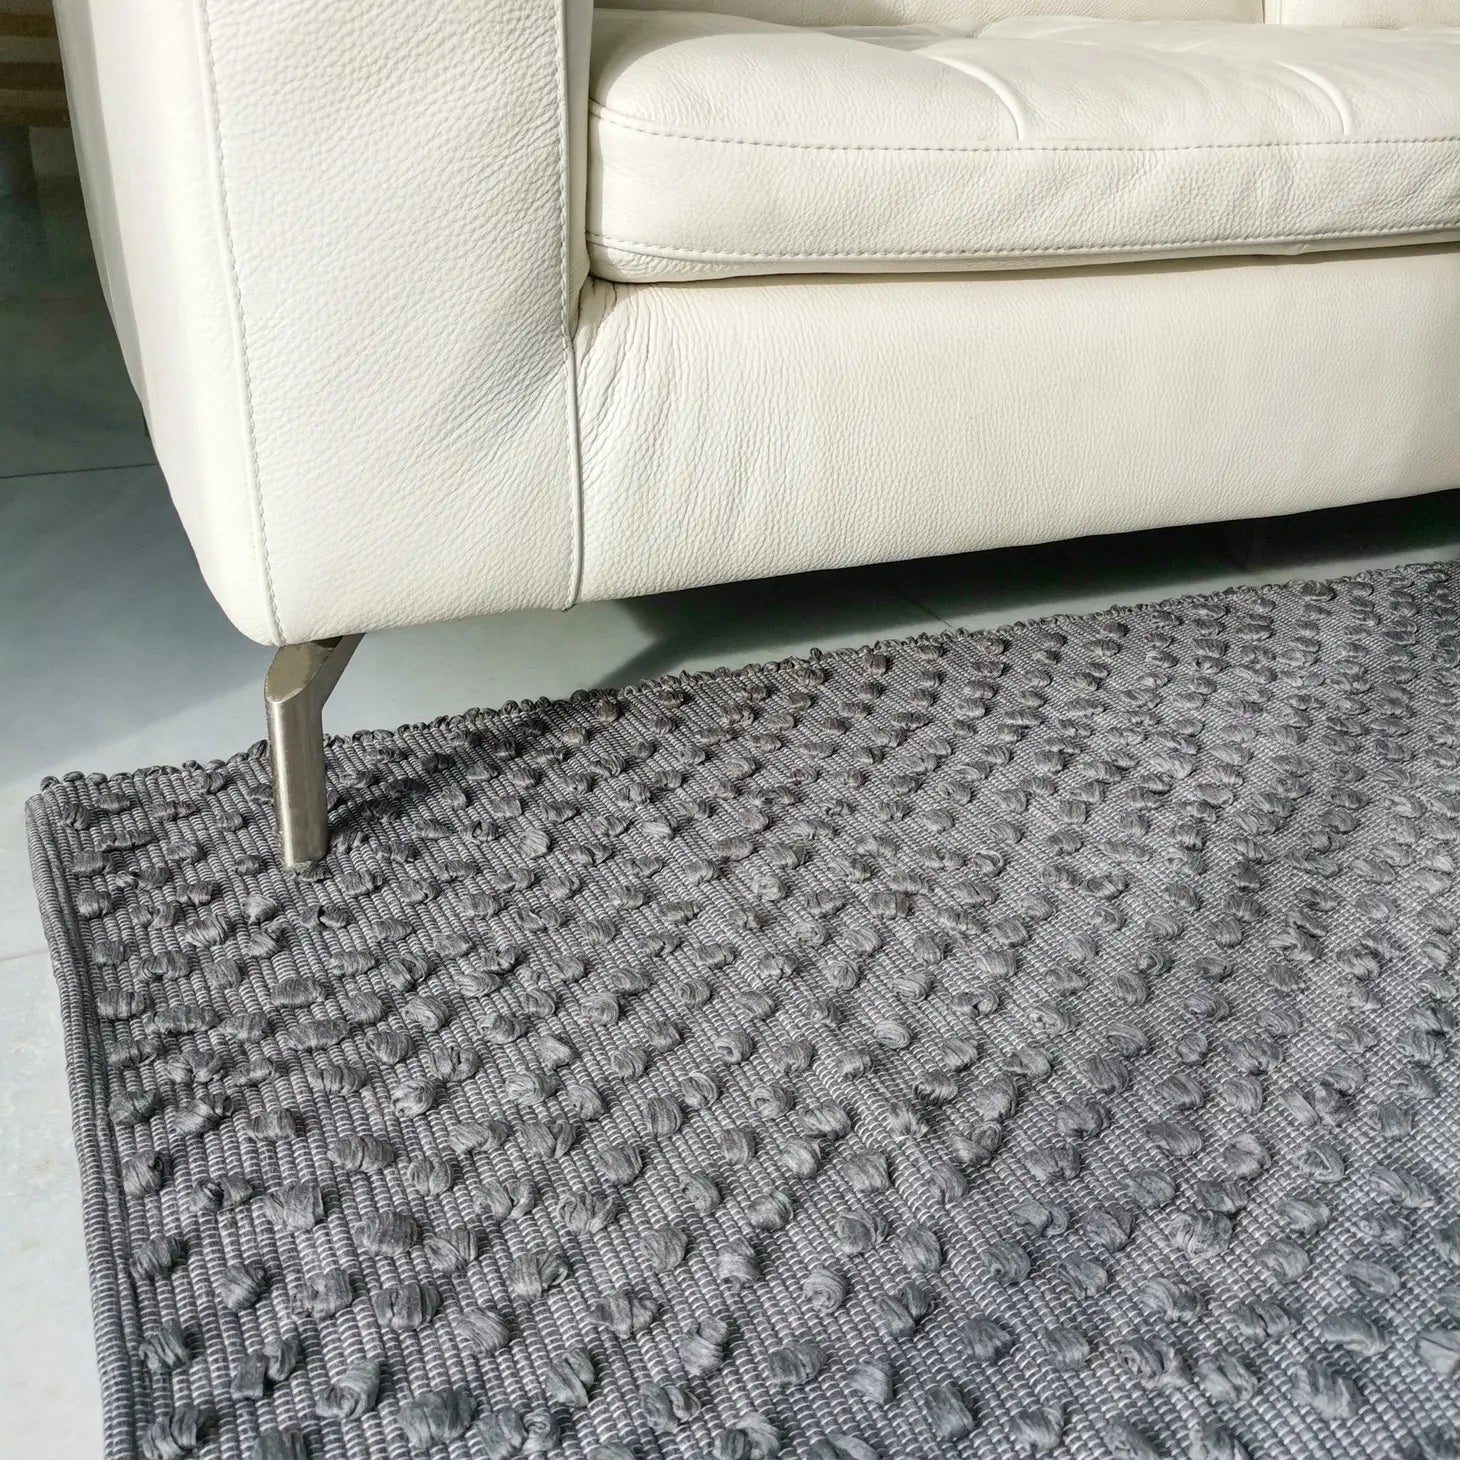 Montaria Handwoven Rug From Upcycled Materials in Black